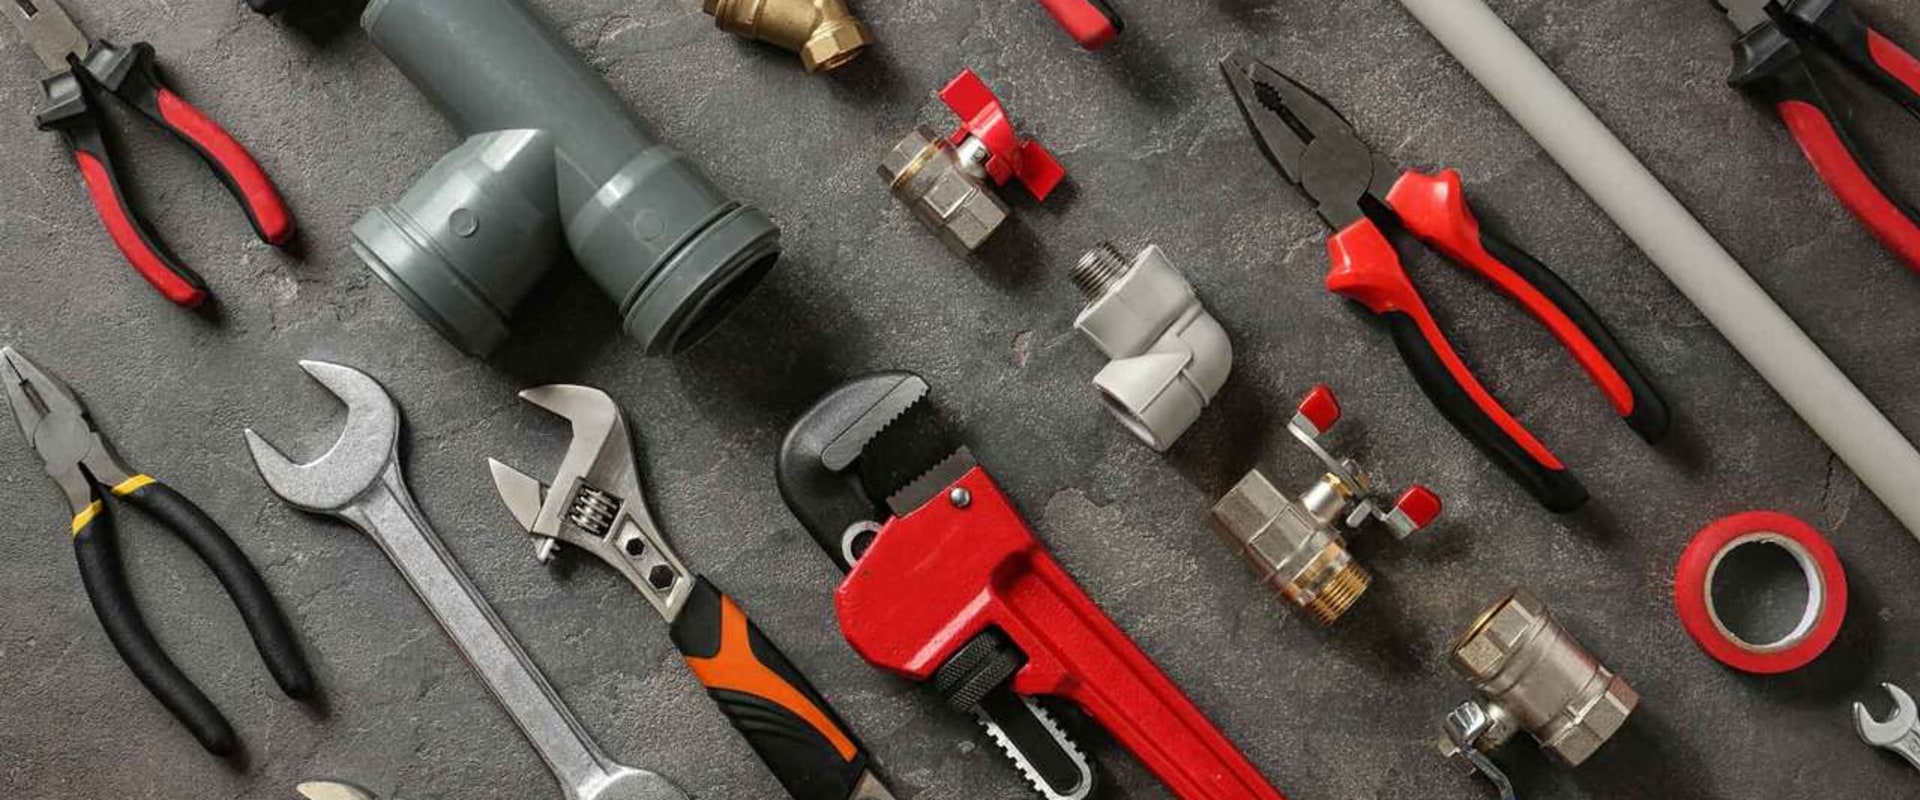 Repair Tools and Equipment: A Comprehensive Overview